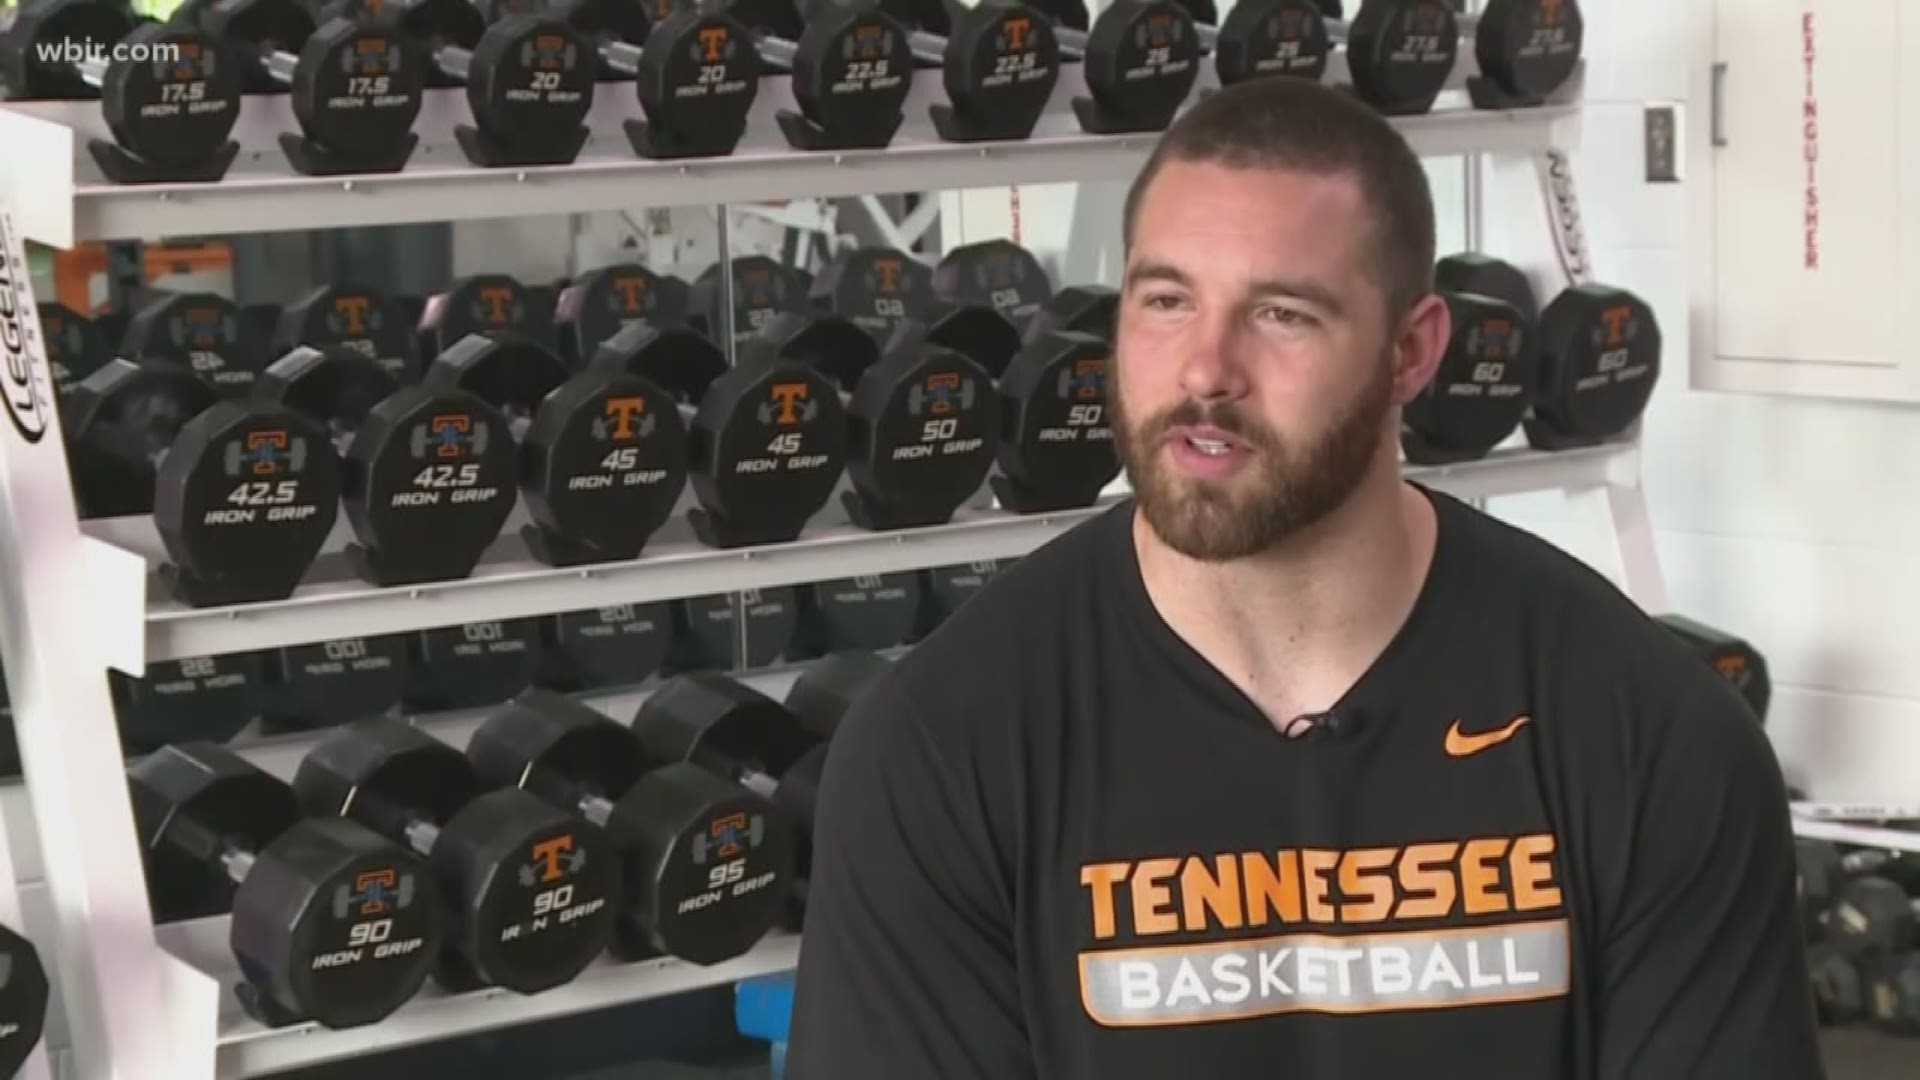 Somebody has to be responsible for pushing the team to their limit. For Tennessee, that guy is strength coach Garrett Medenwald.